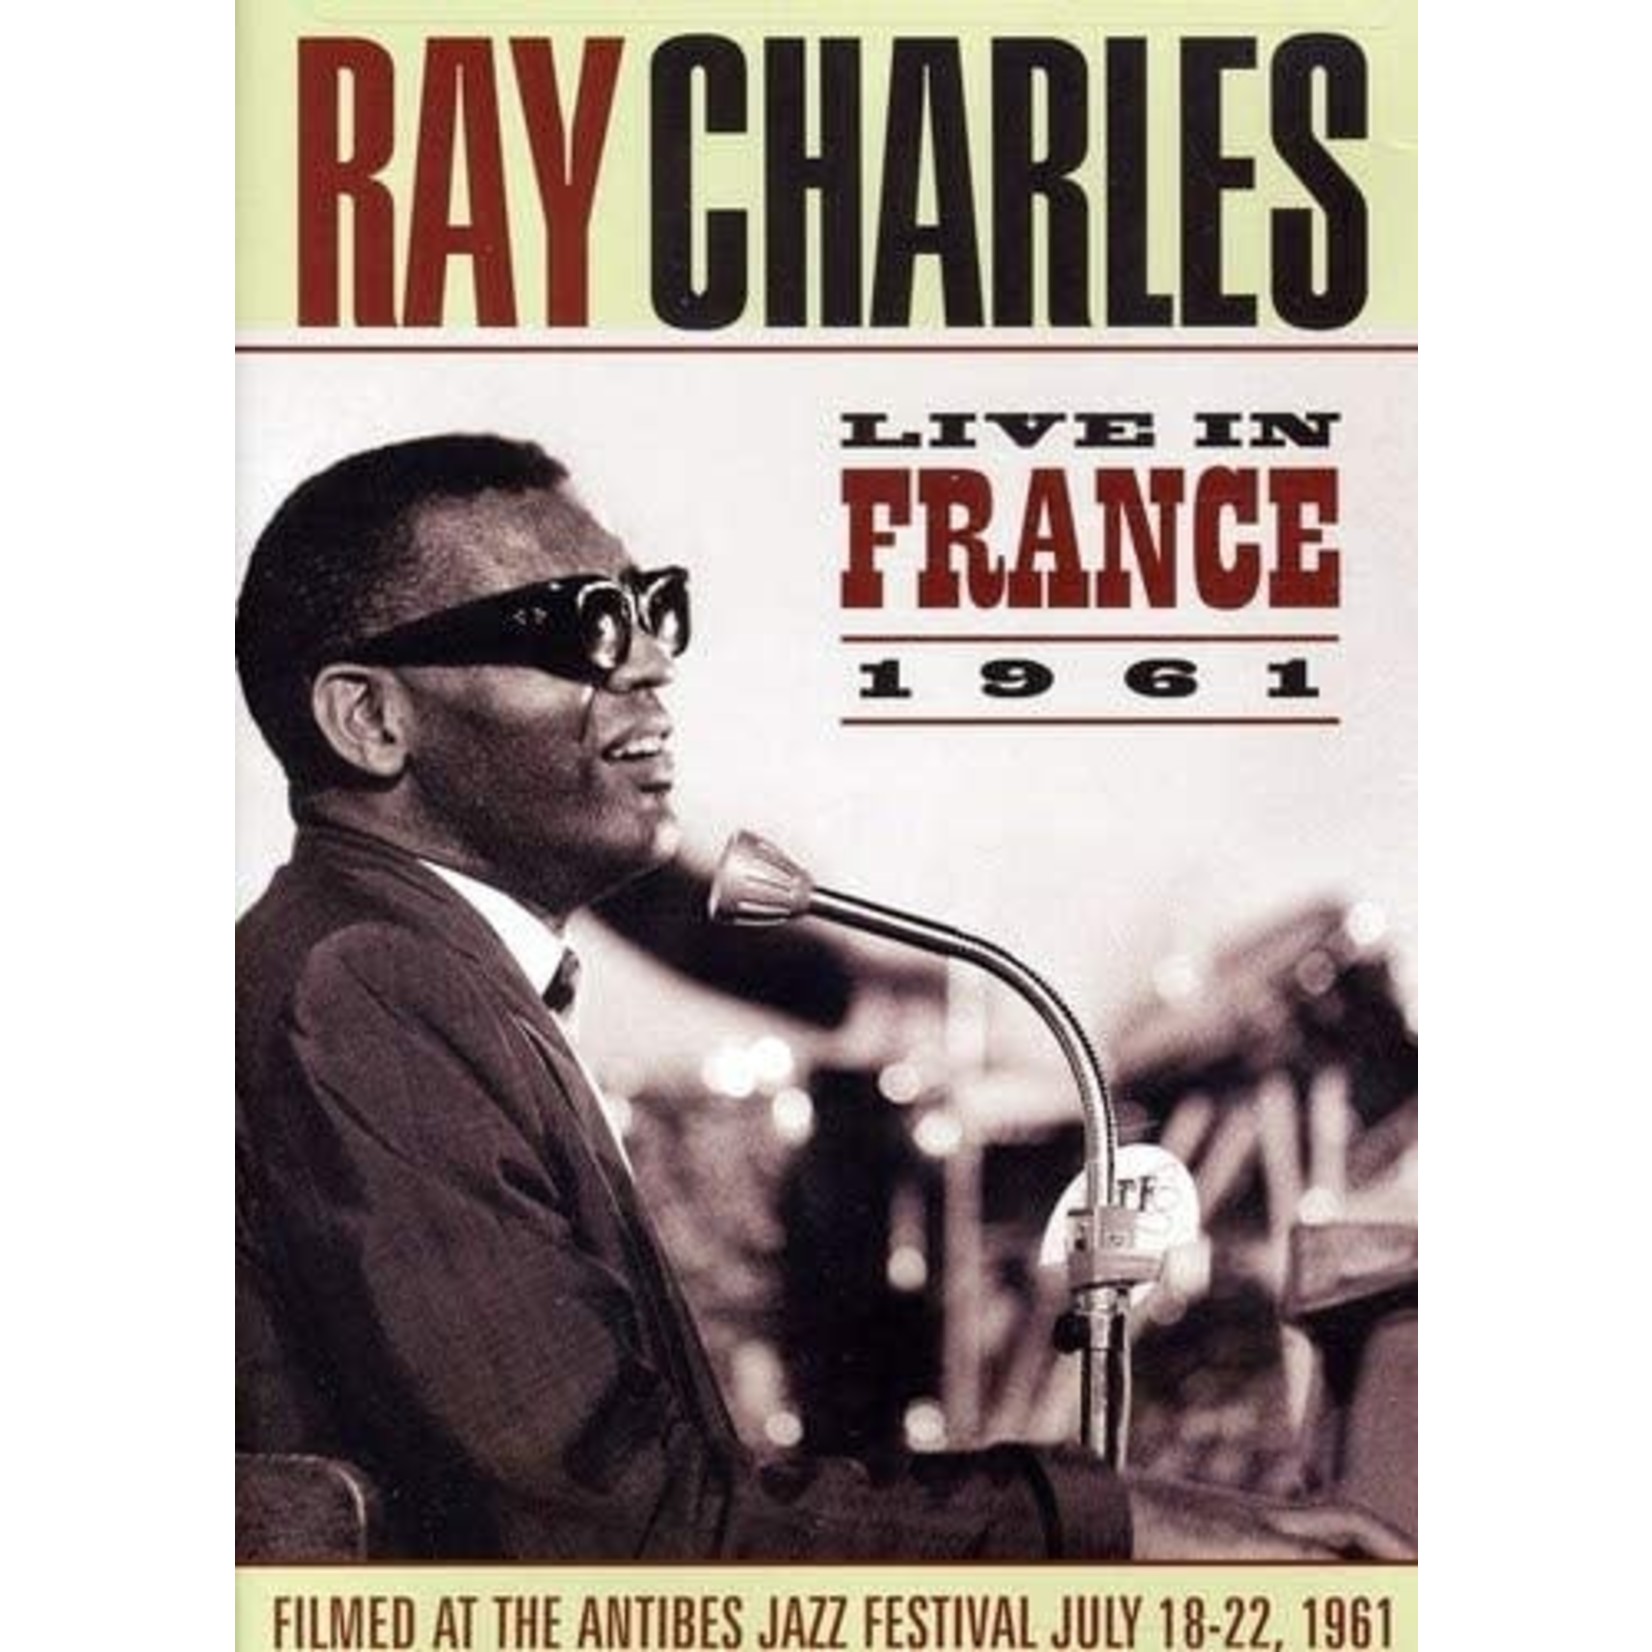 Ray Charles - Live In France 1961 [DVD]